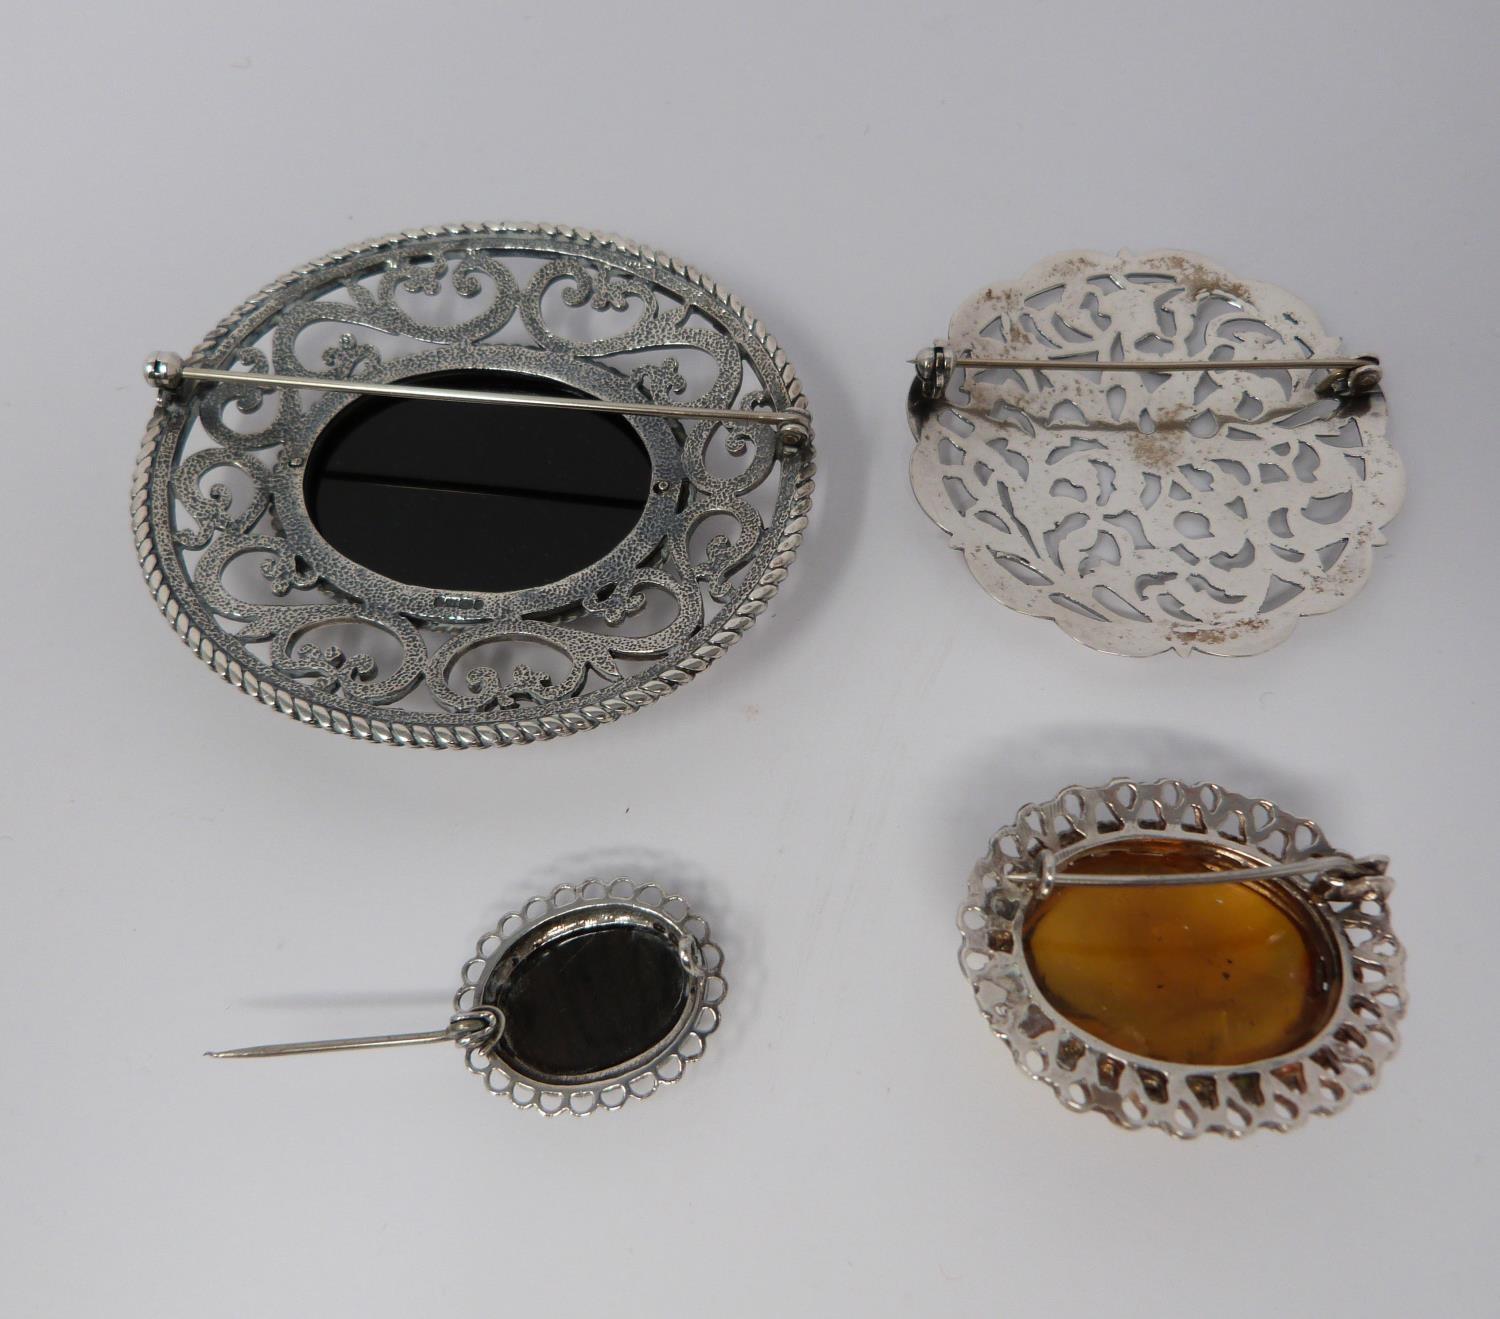 Large jet and hallmarked silver pierced brooch, with a pierced white metal brooch, small silver - Image 2 of 7